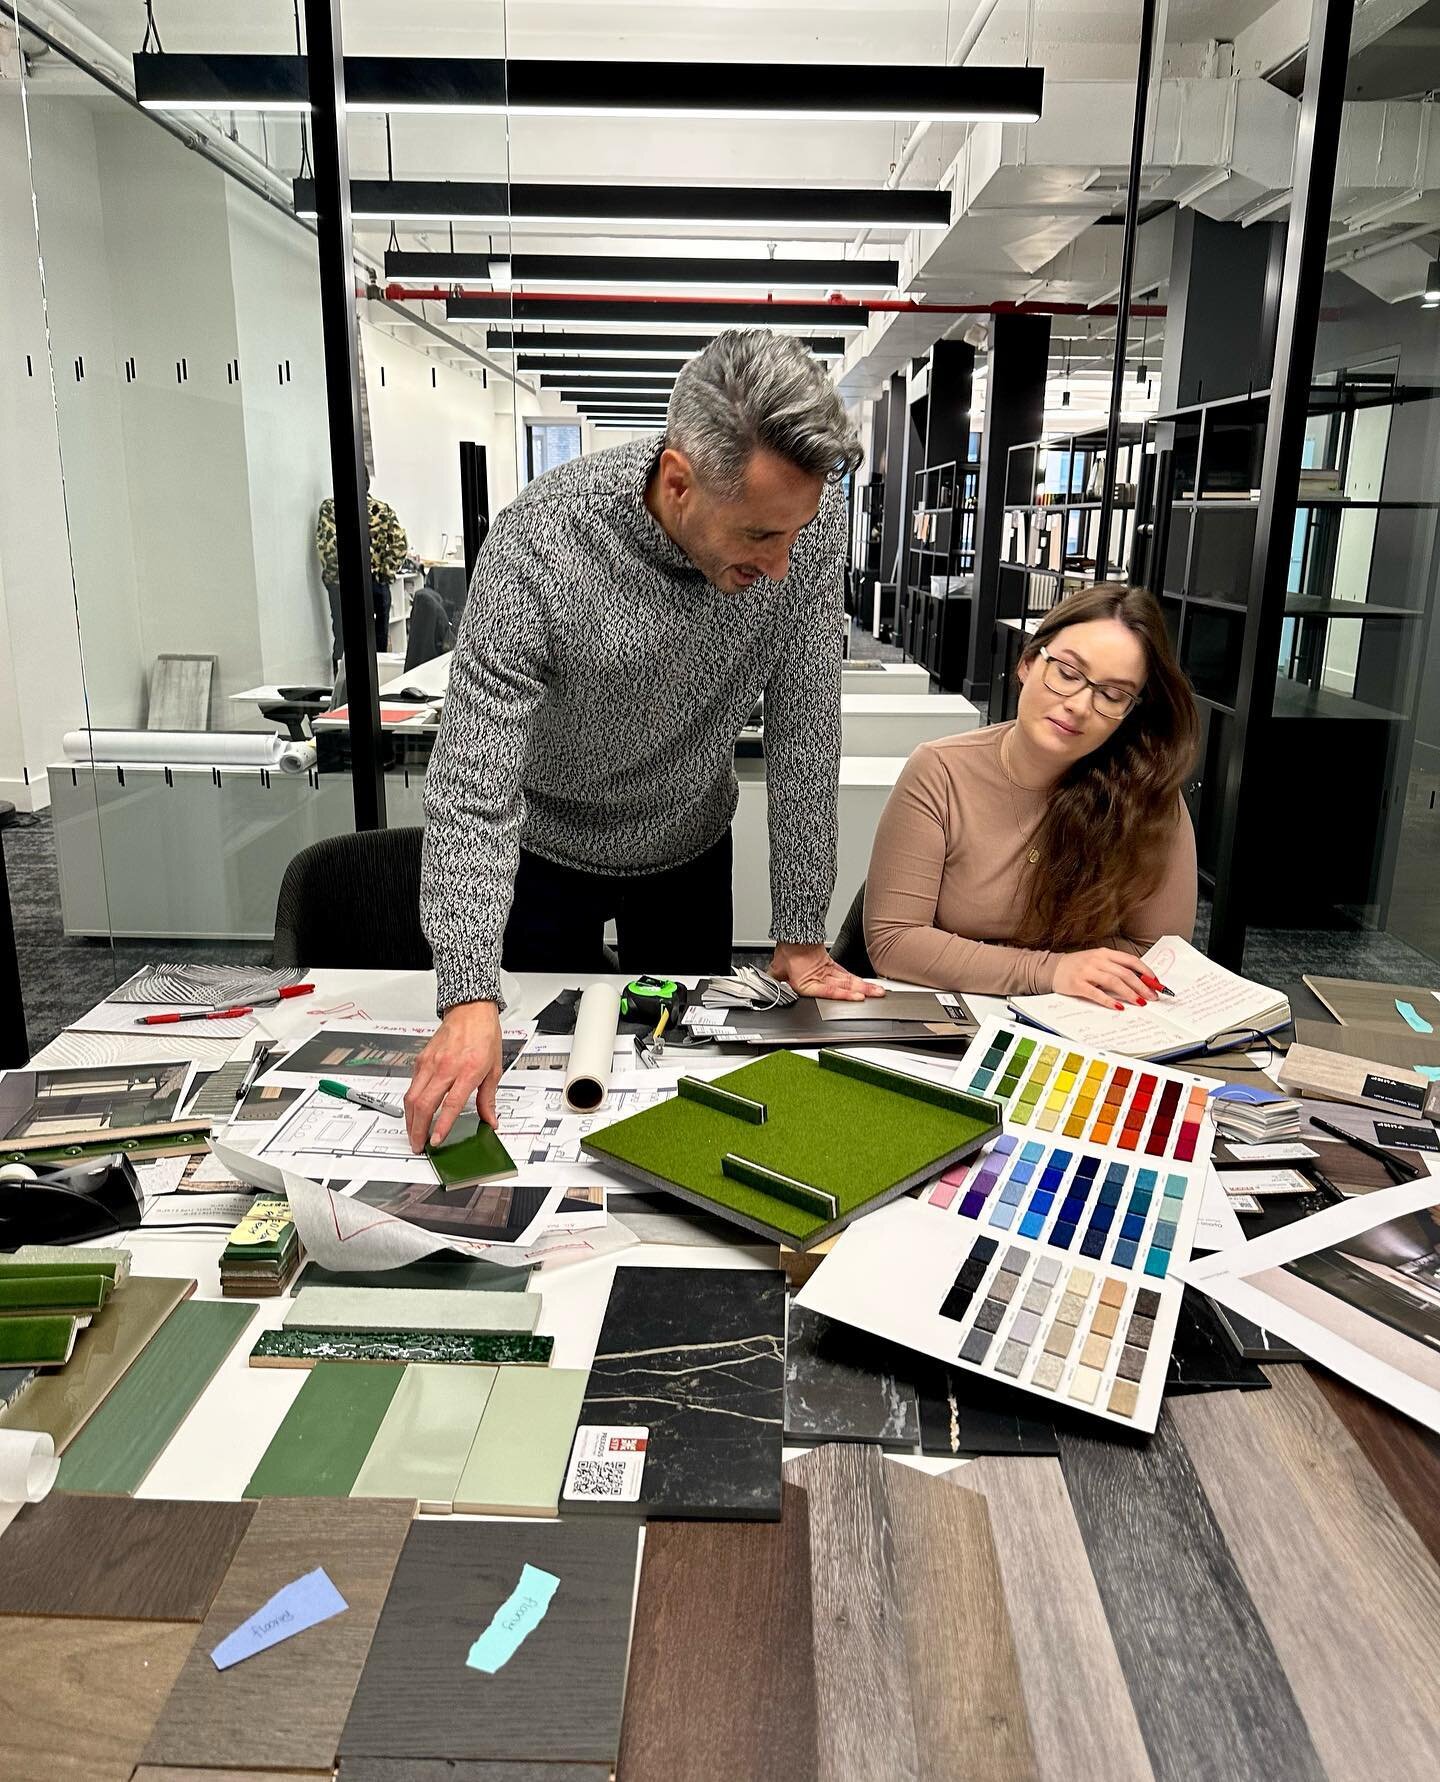 The interior and architectural design process is a thoughtful choreography between creativity, purpose and functionality. Our service, and passion, is to guide our clients and projects to create spaces that are aesthetically pleasing while also being